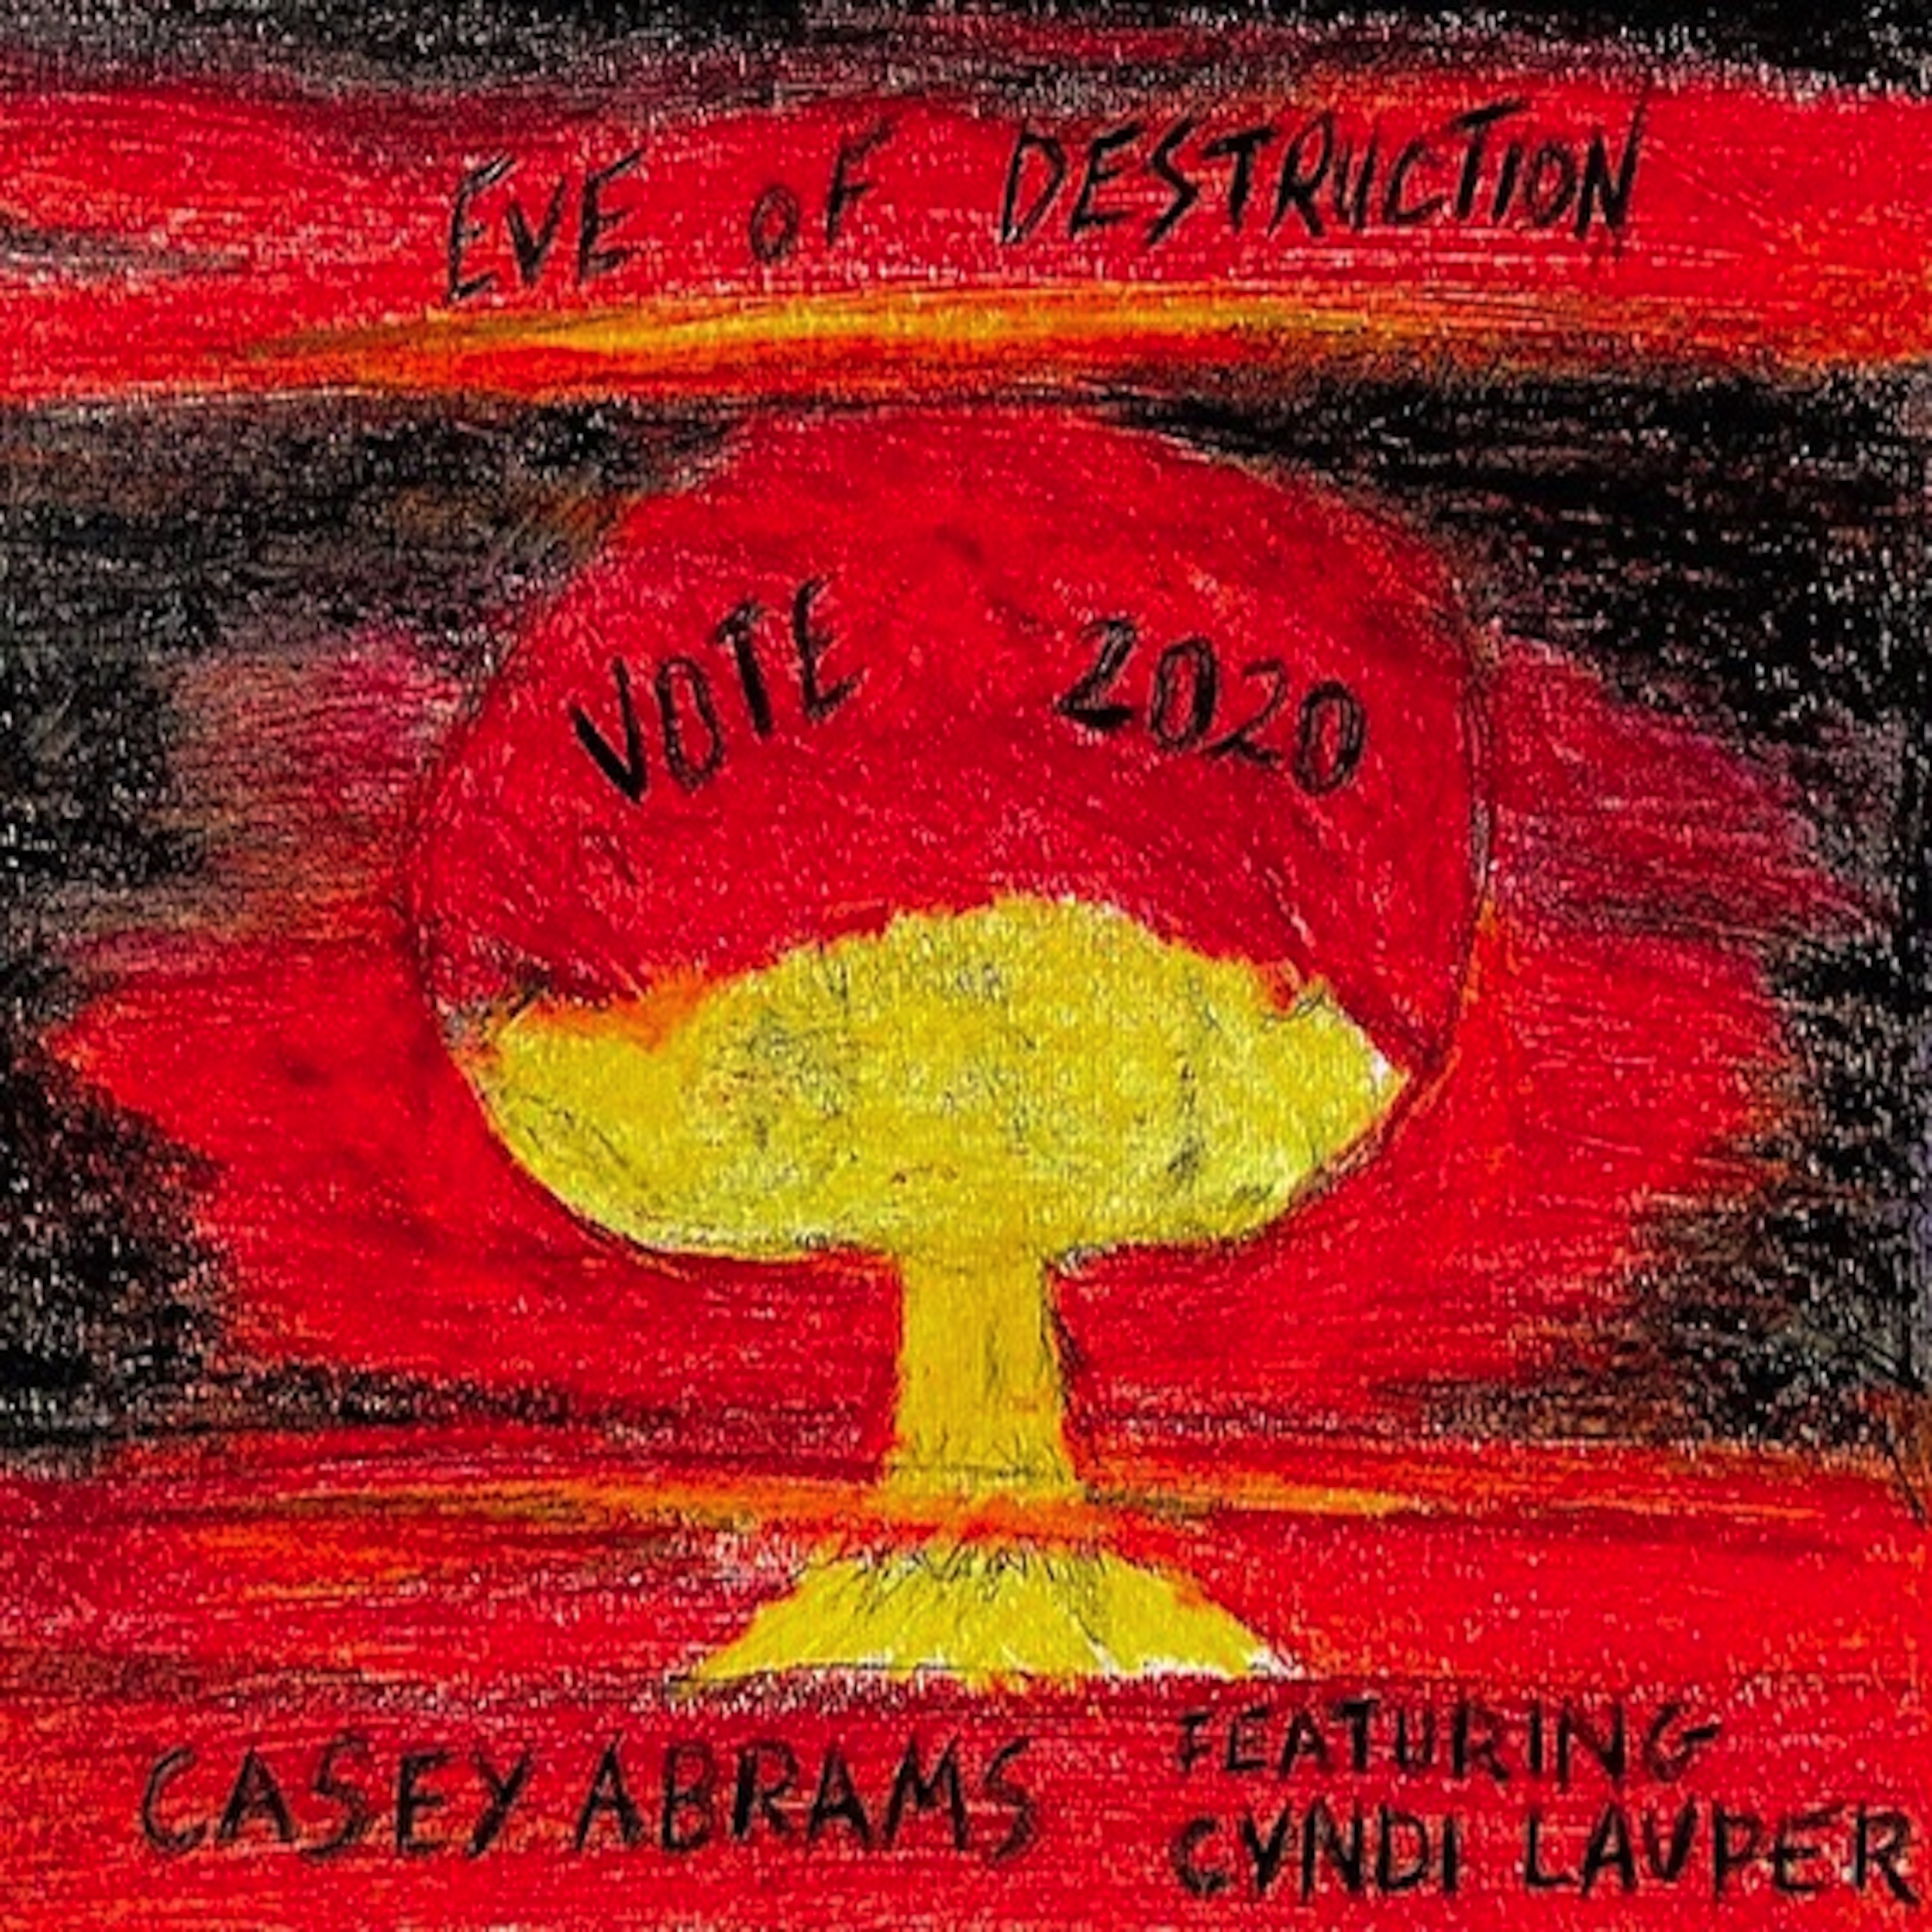 Casey Abrams Discusses Teaming With Cyndi Lauper for Reimagining of “Eve of Destruction”